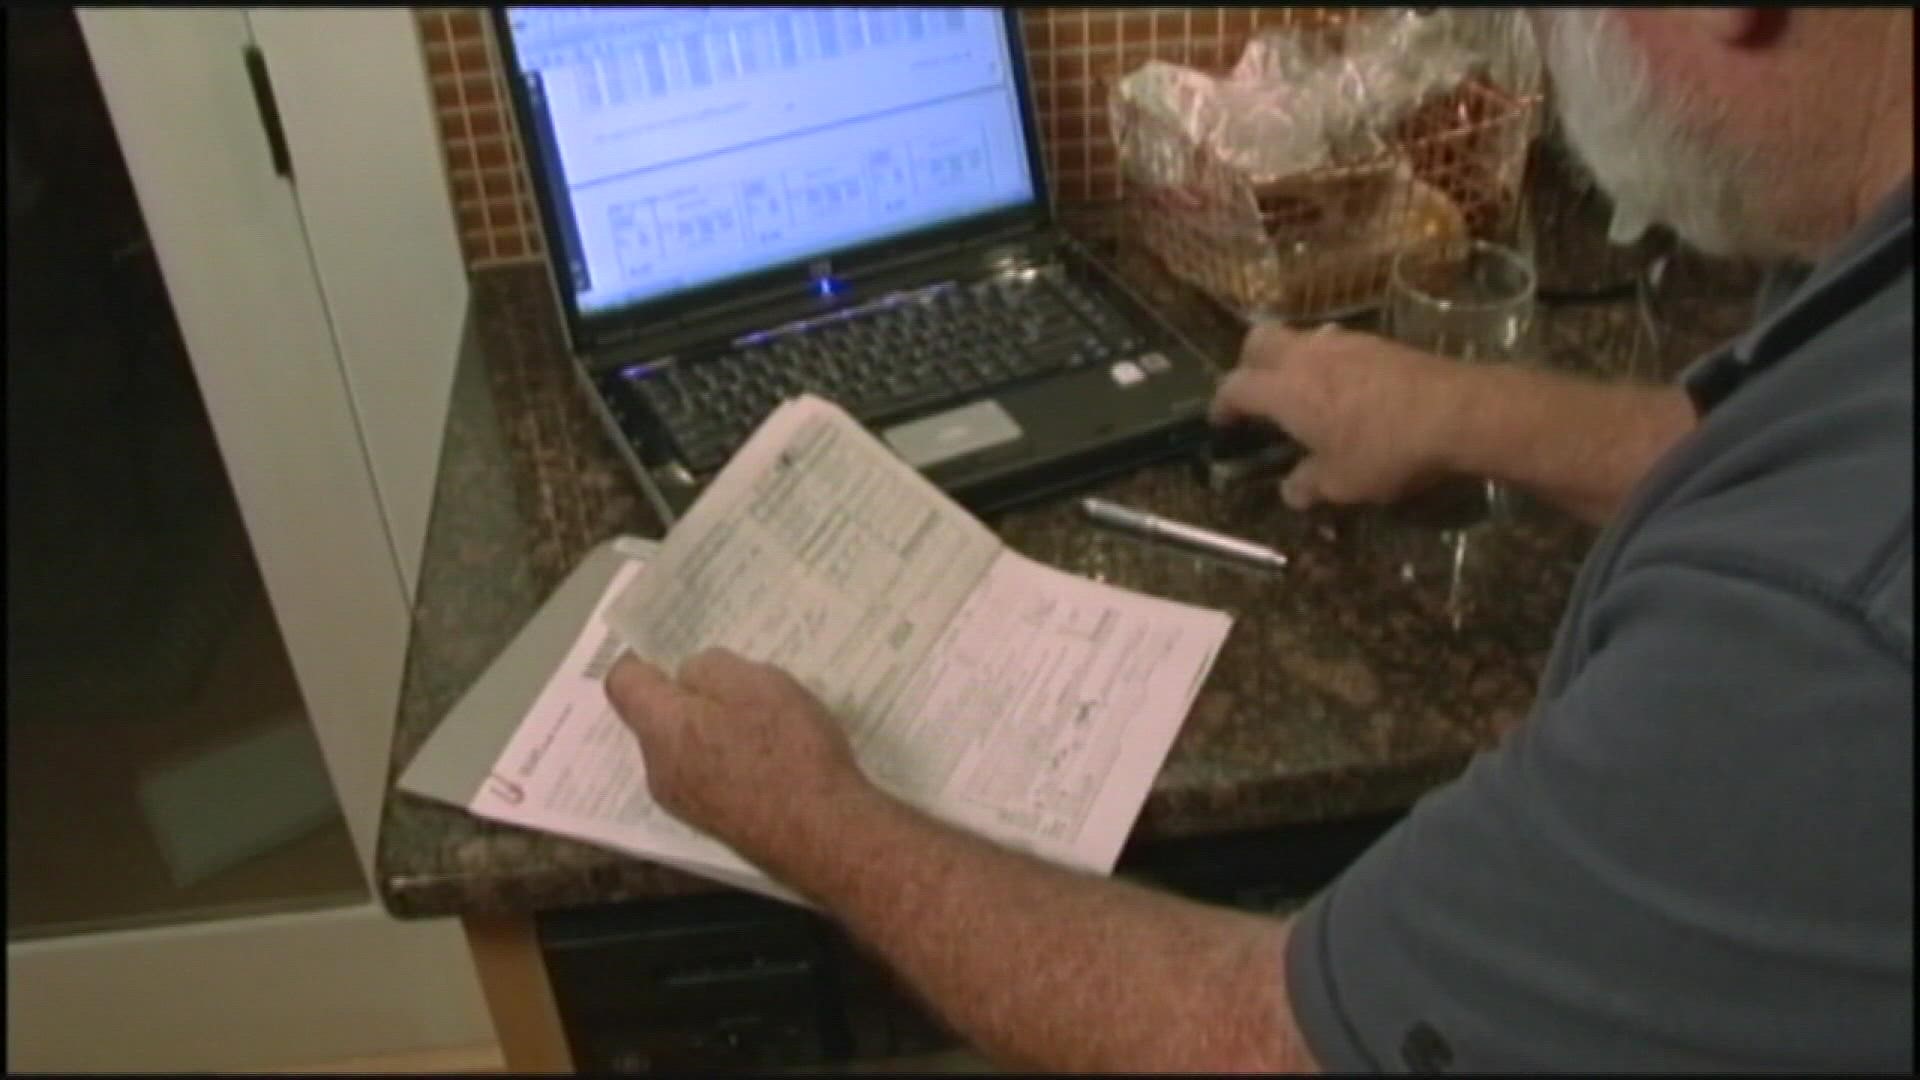 This year, the deadline for filing tax returns is Monday, April 18, which is three days later than the usual deadline for filing taxes.